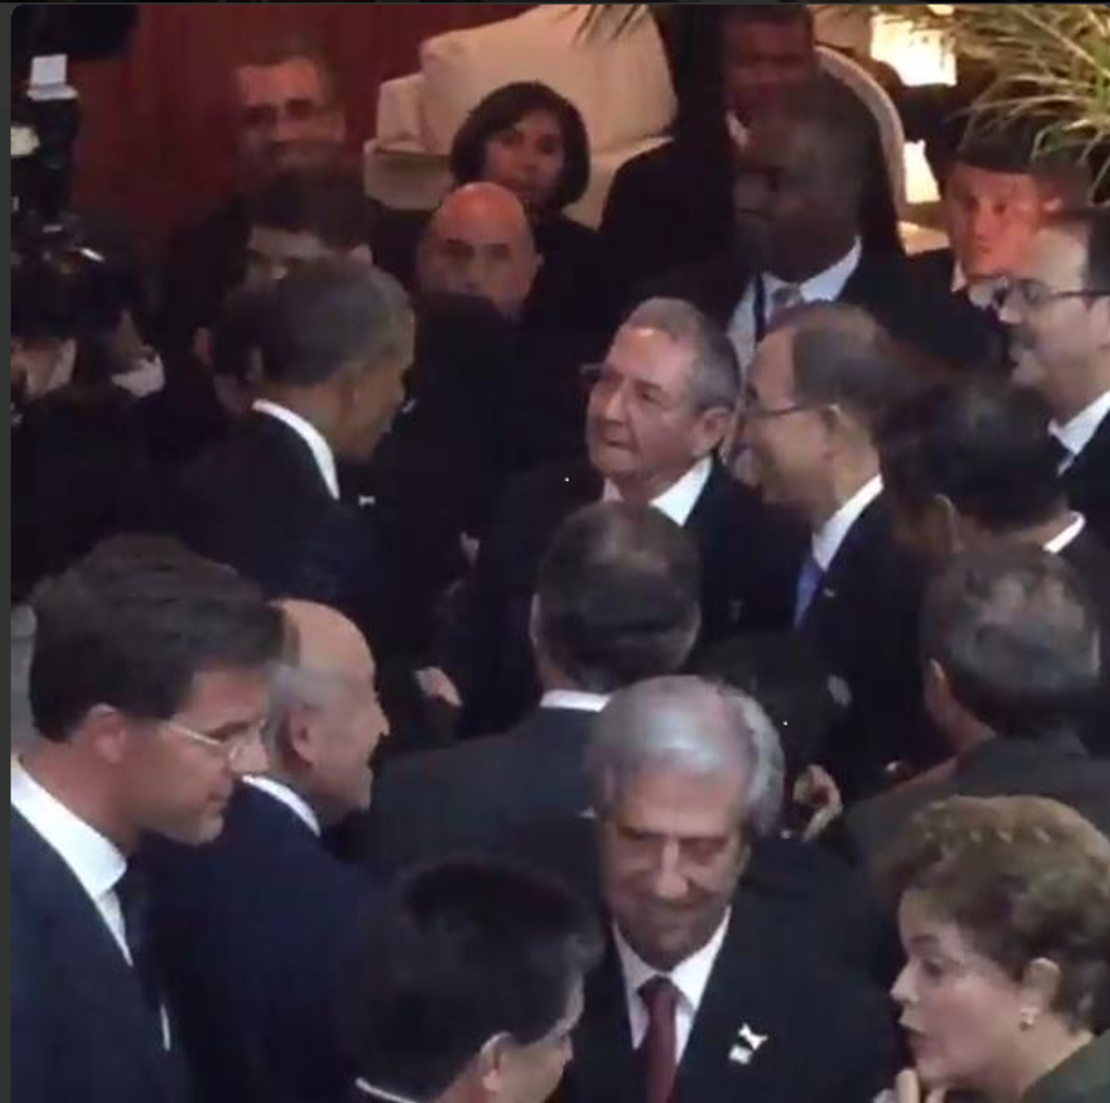 President Obama greets and shakes hands with Cuban leader Raul Castro at the Summit of the Americas in Panama City, Panama.